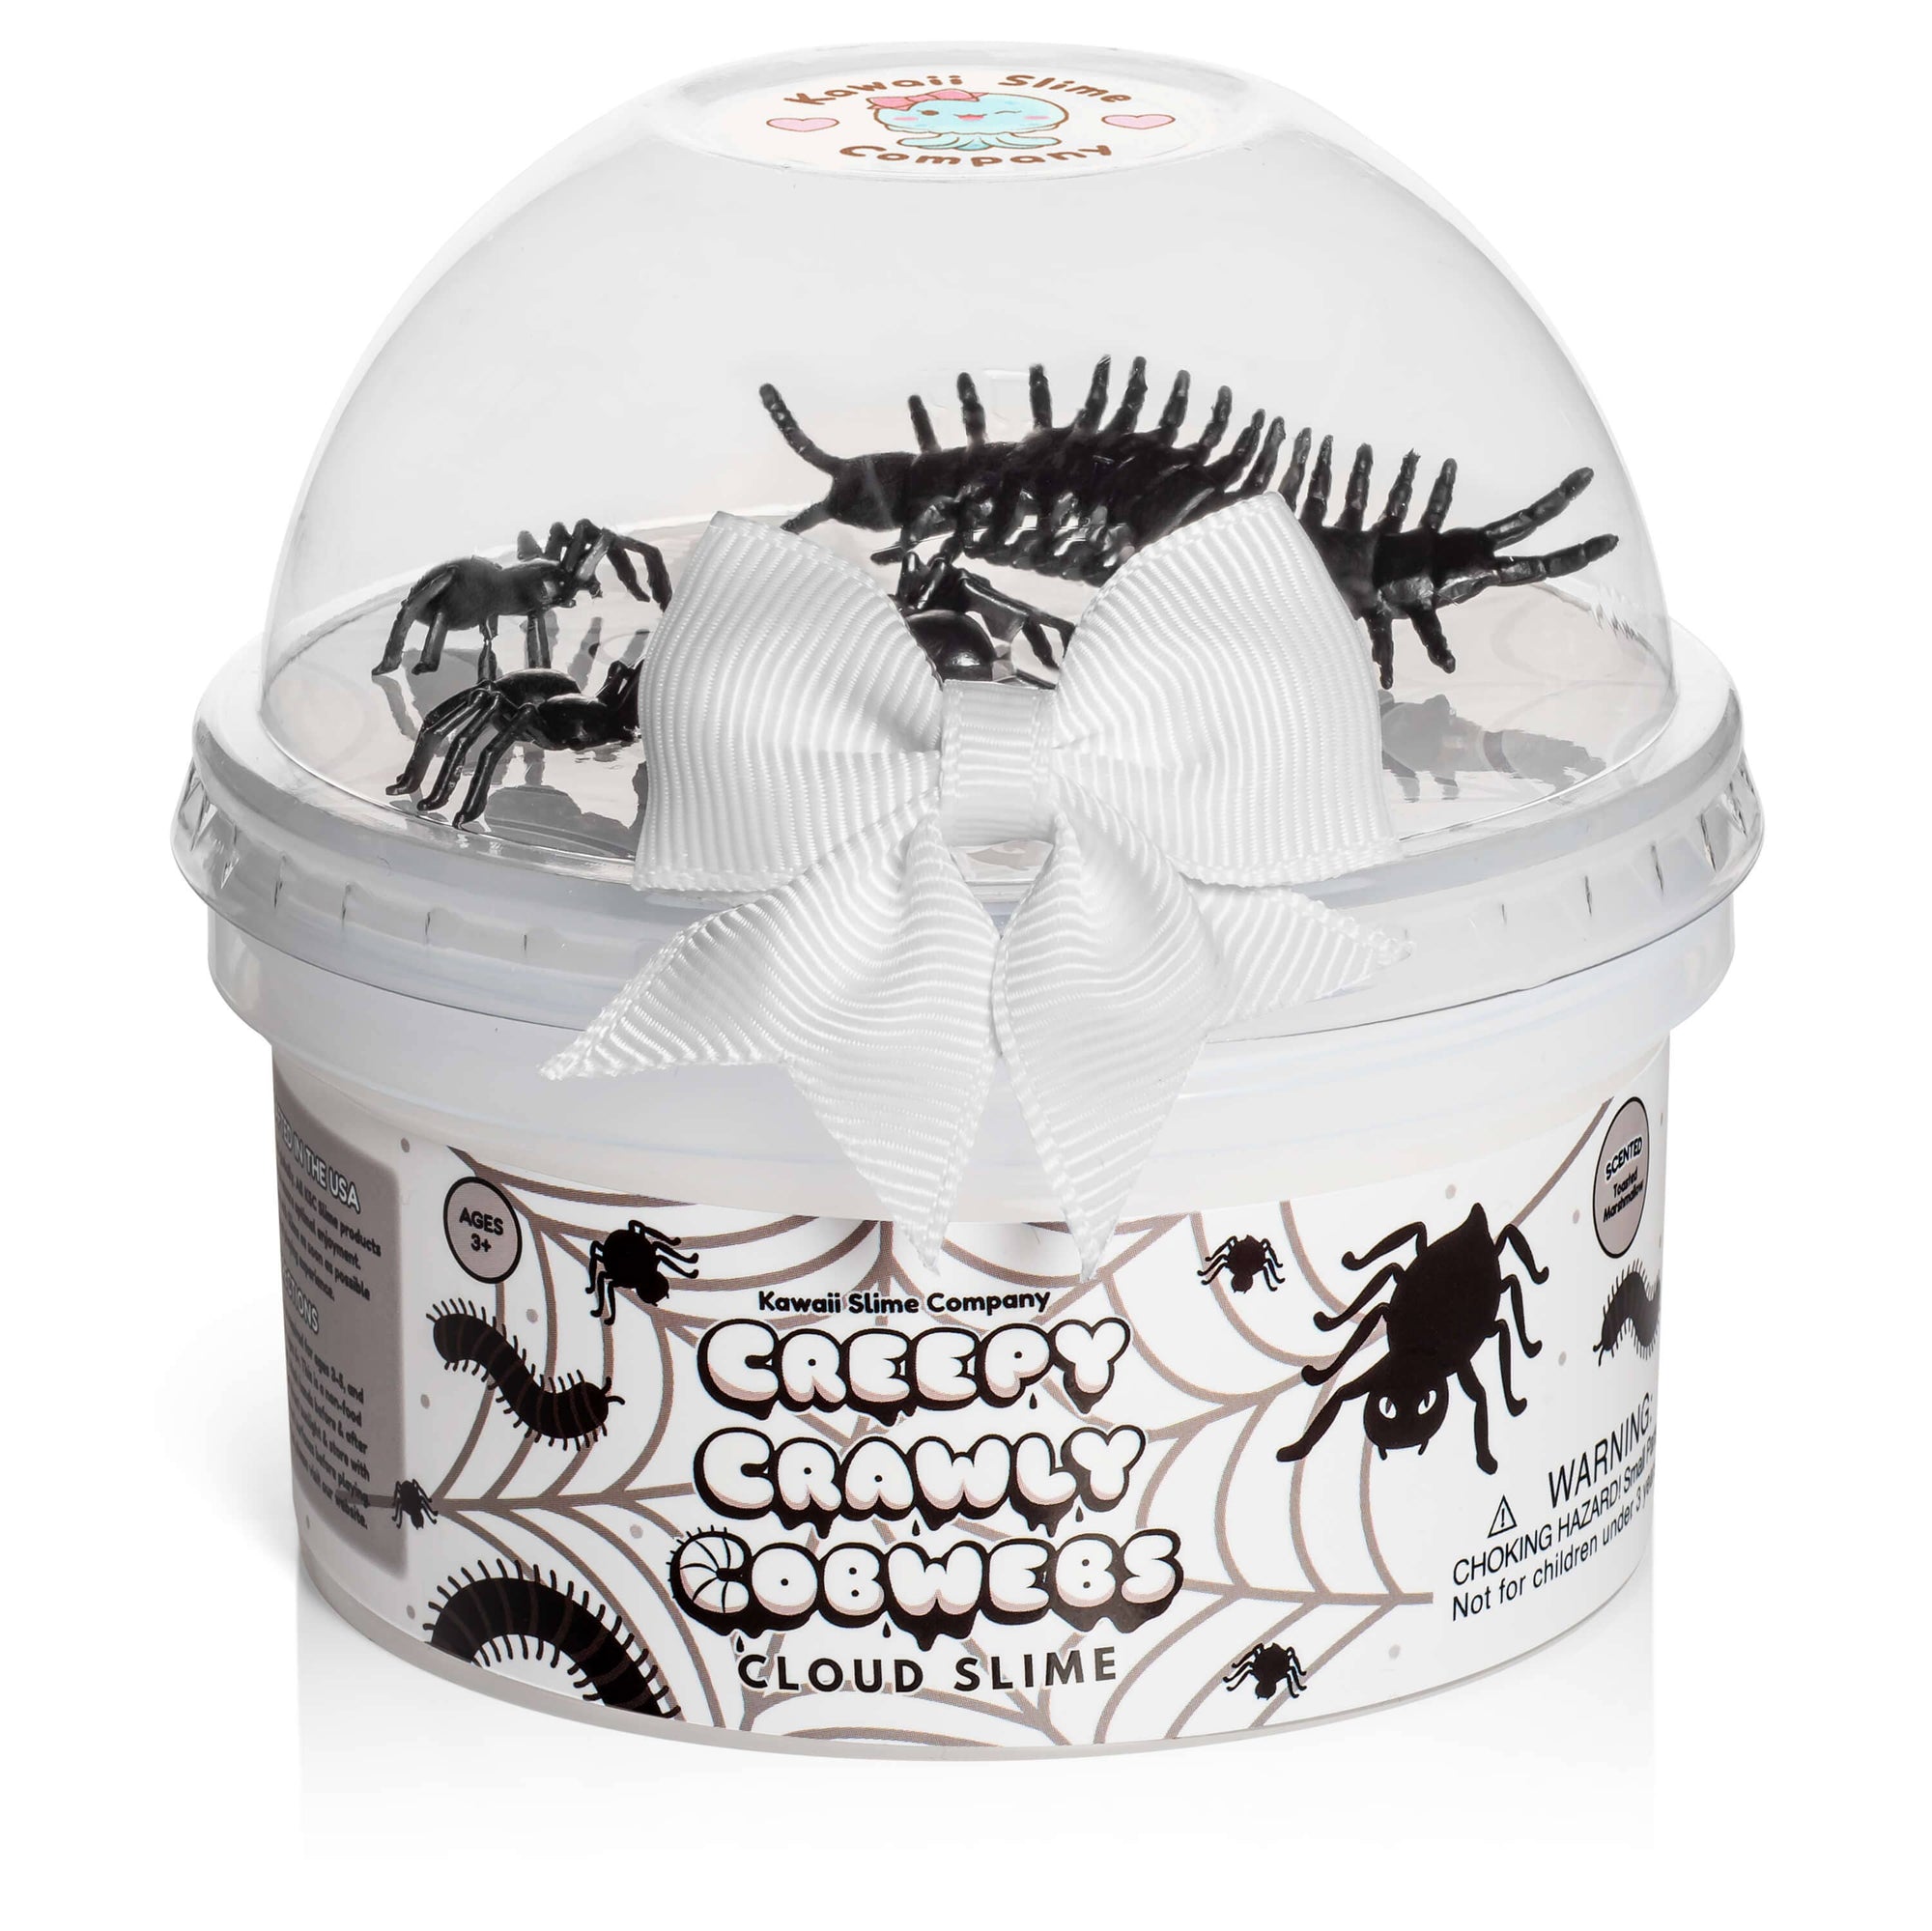 Front view of Creepy Crawly Cobwebs Cloud Slime in its container.